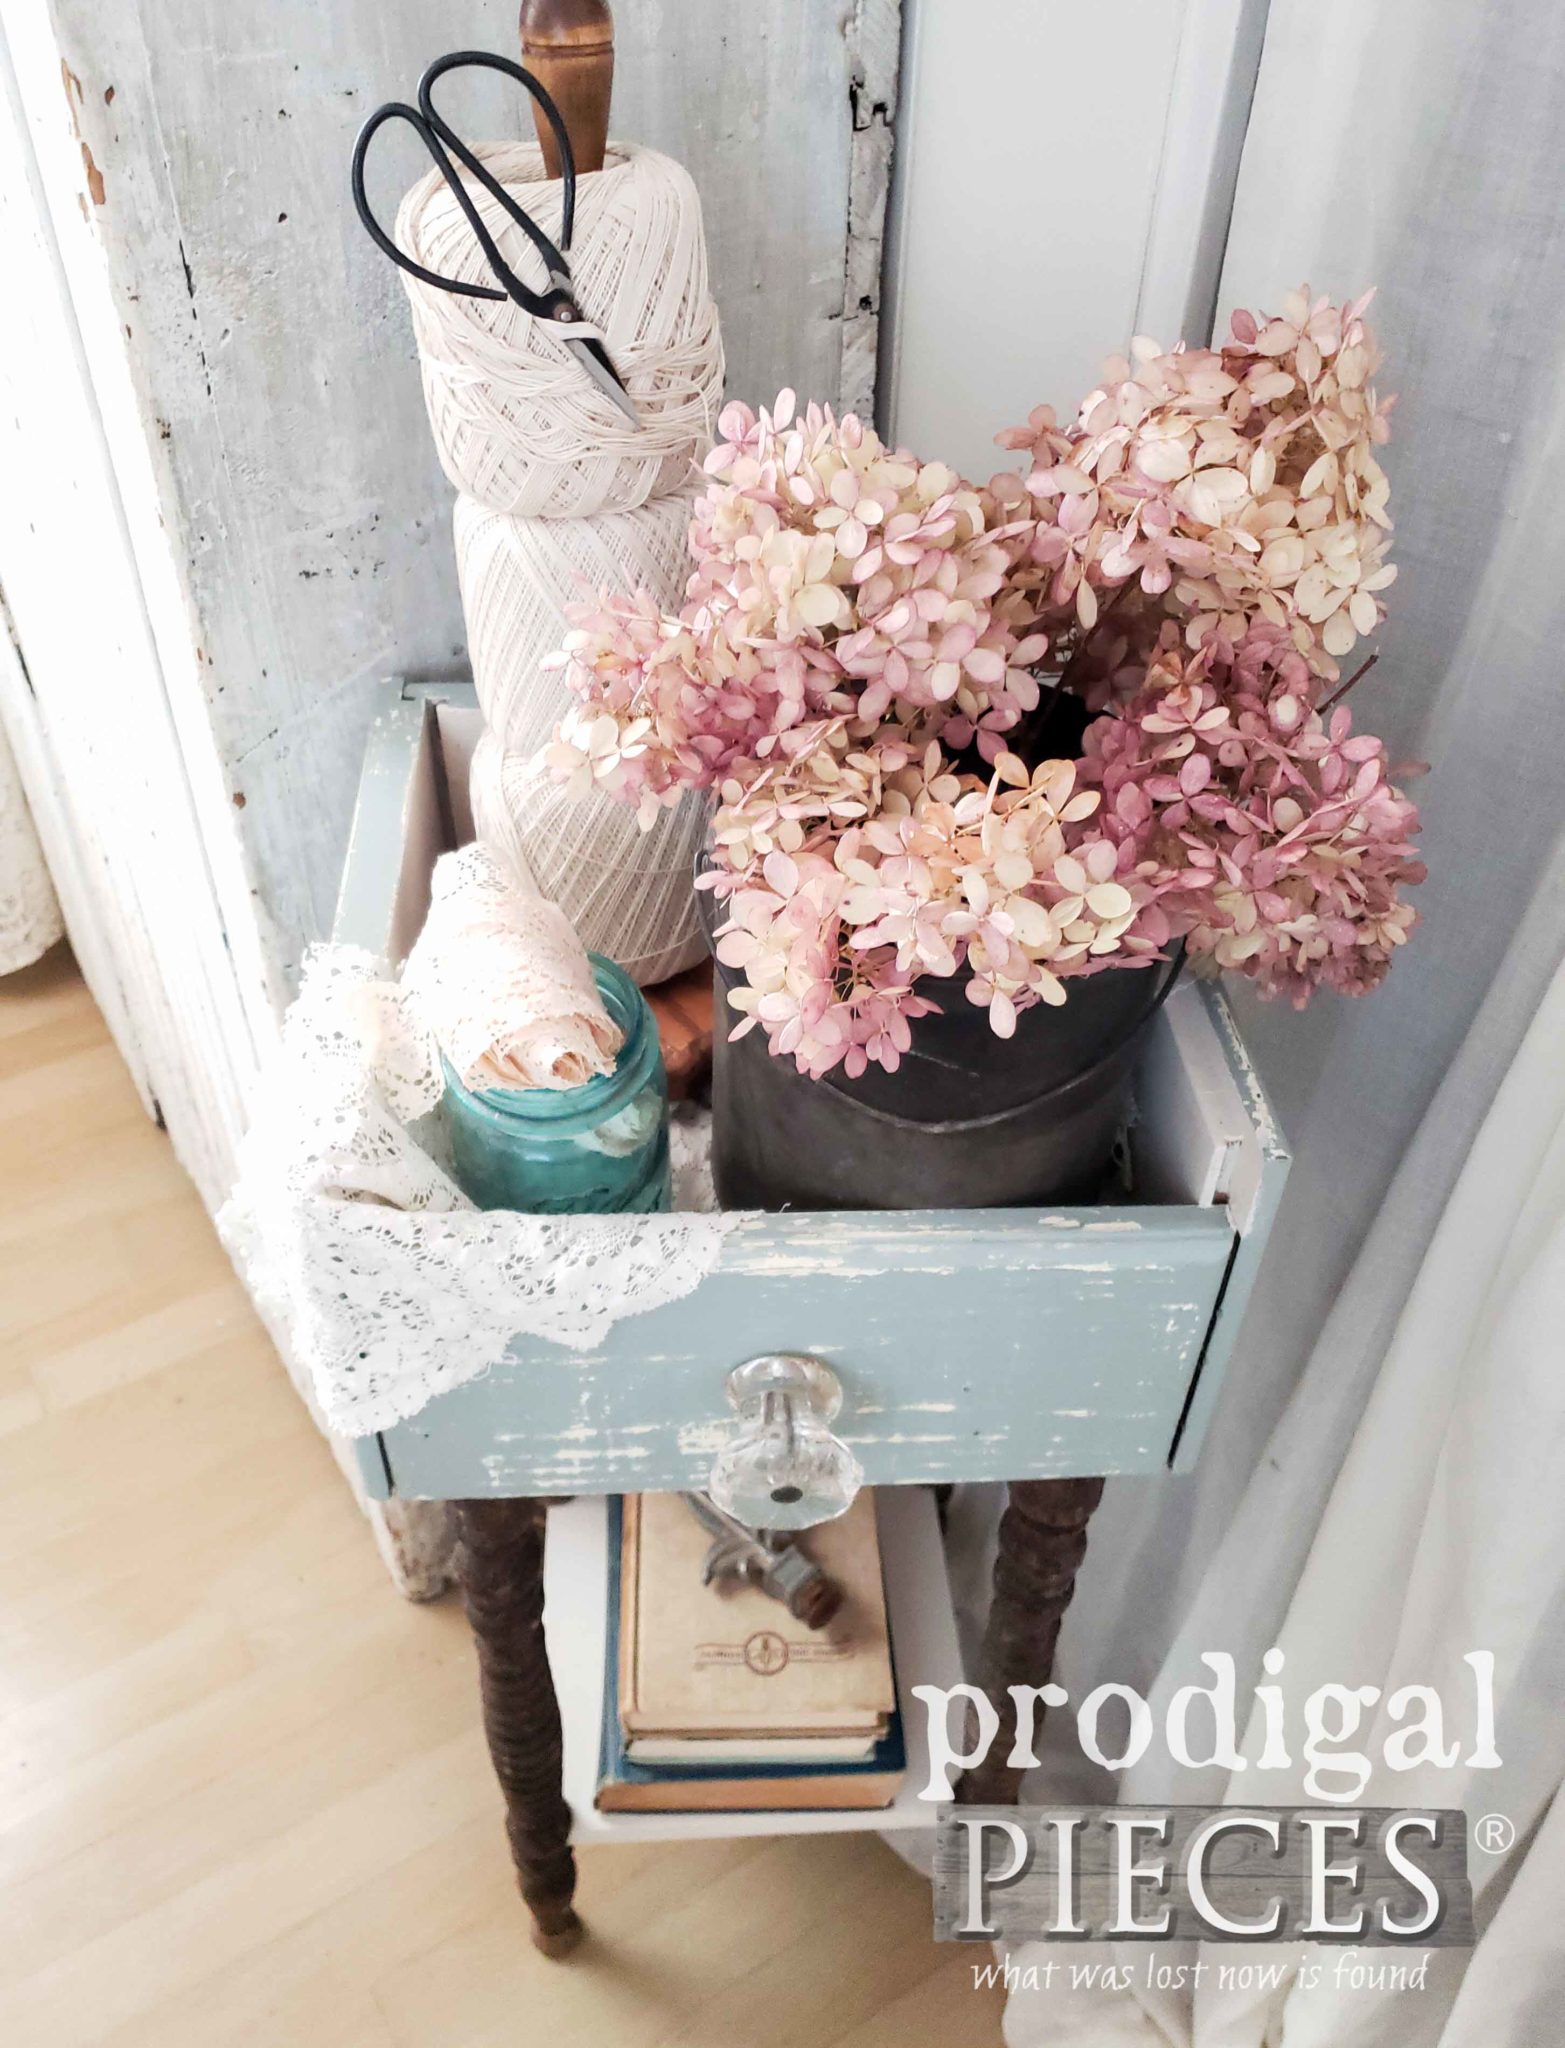 Top View of Handmade Upcycled Plant Stand by Larissa of Prodigal Pieces | prodigalpieces.com